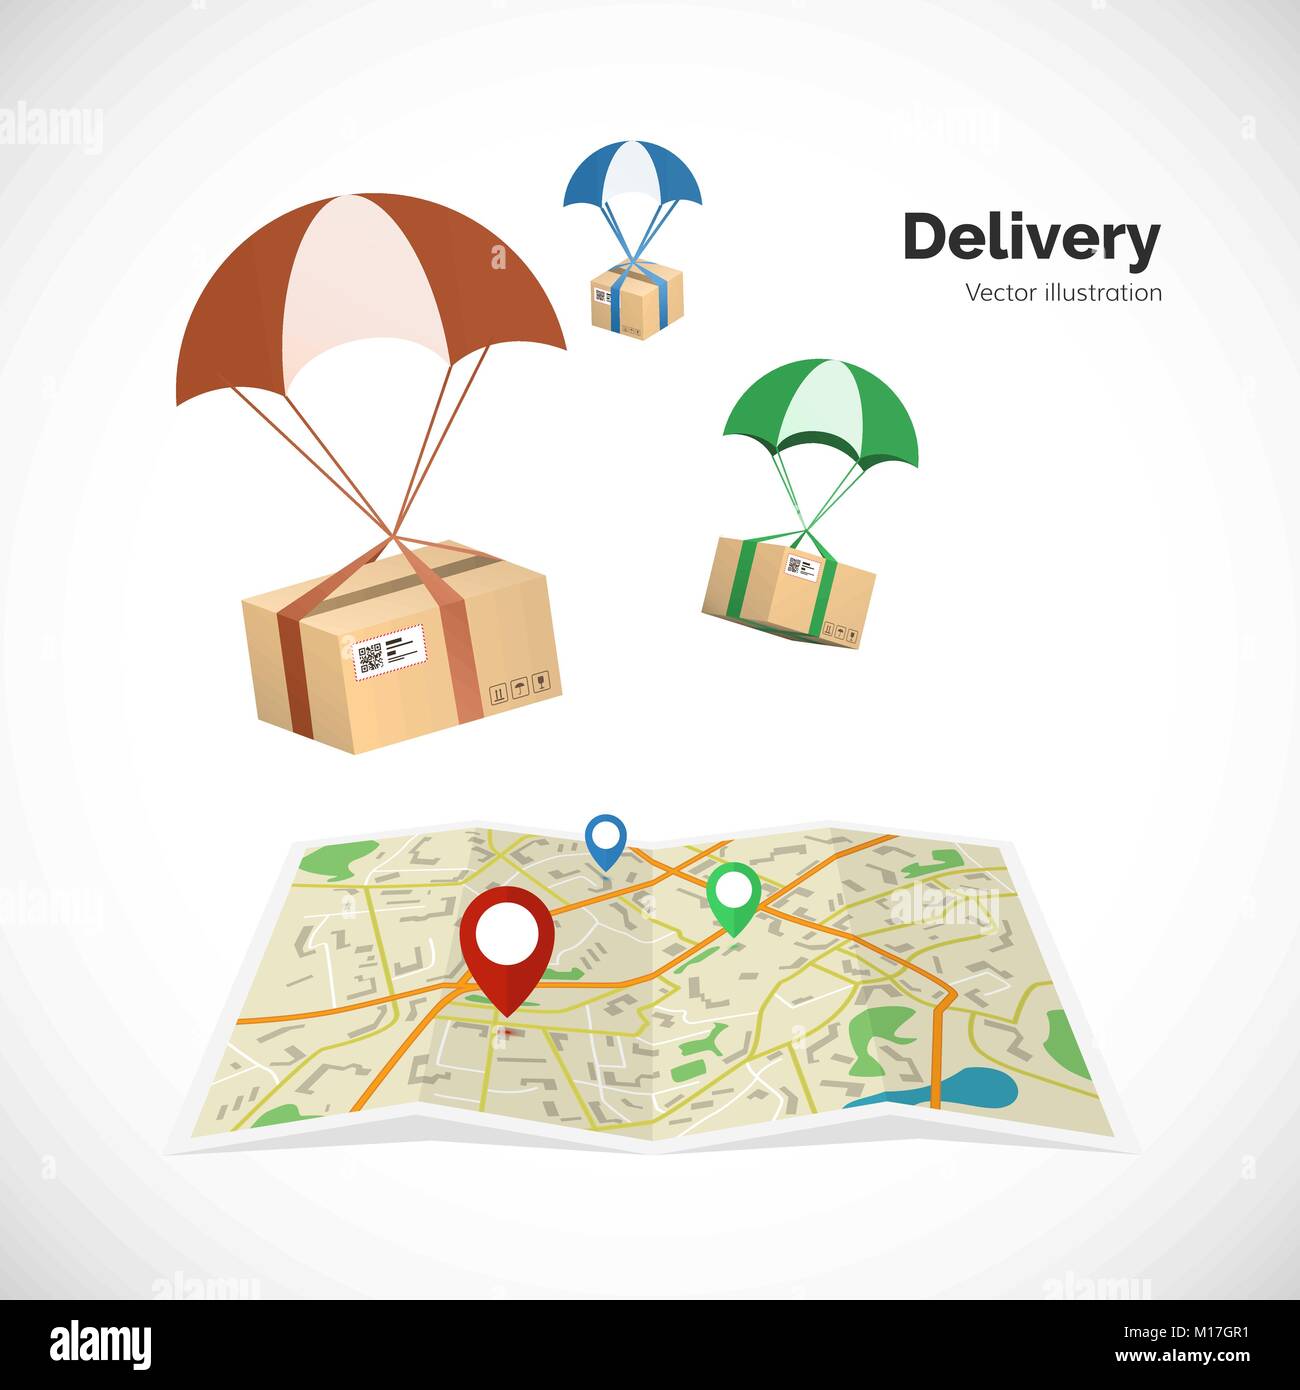 Delivery service. Parcels fly to the destination indicated on the map by the pointer. Vector illustration Stock Vector